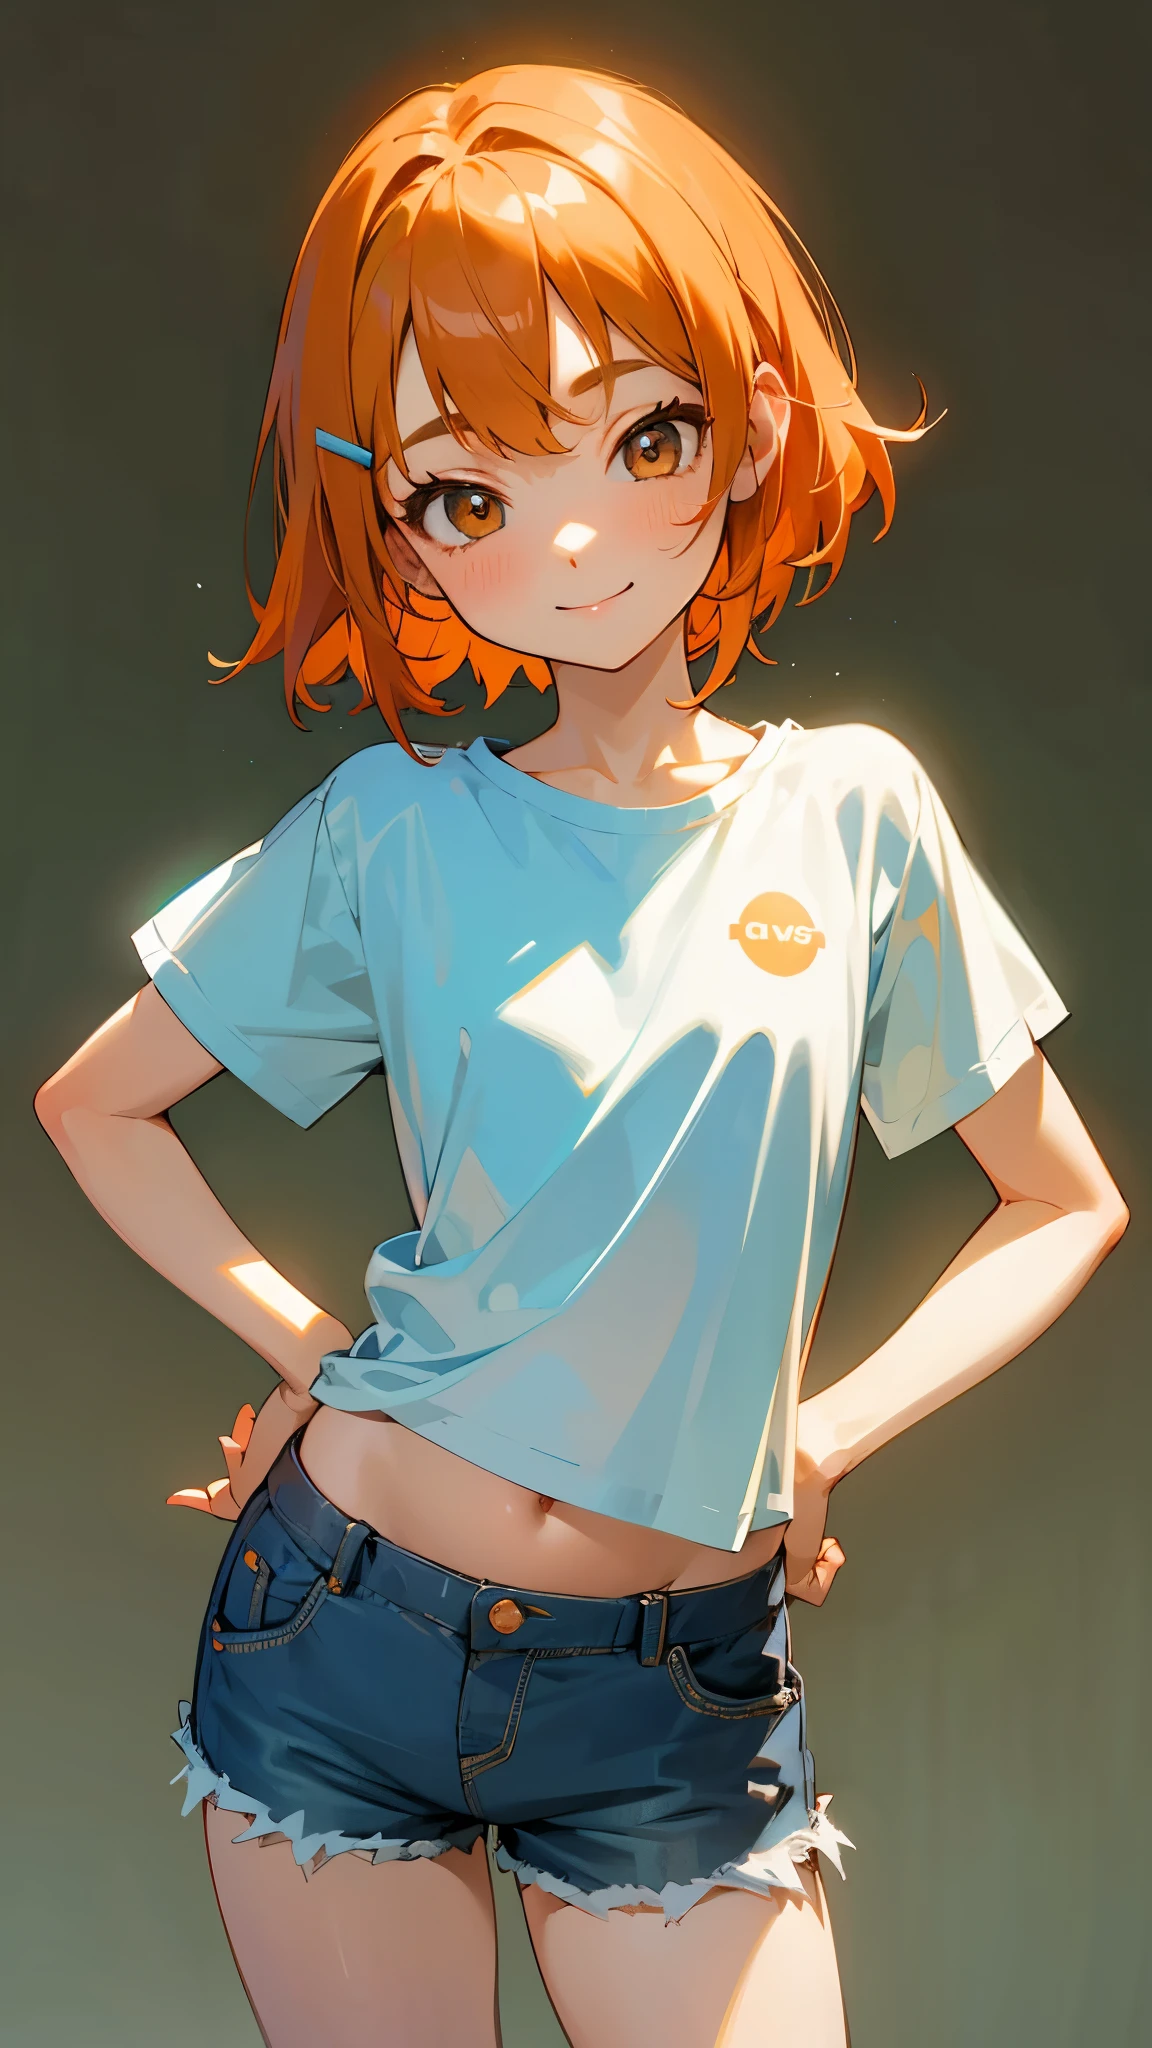 1 girl、cowboy shot、Simple T-shirt、light blue medium hair、Beautiful brown eyes、Orange hair clip、flat chest、smile、Put your hands on your hips、shorts